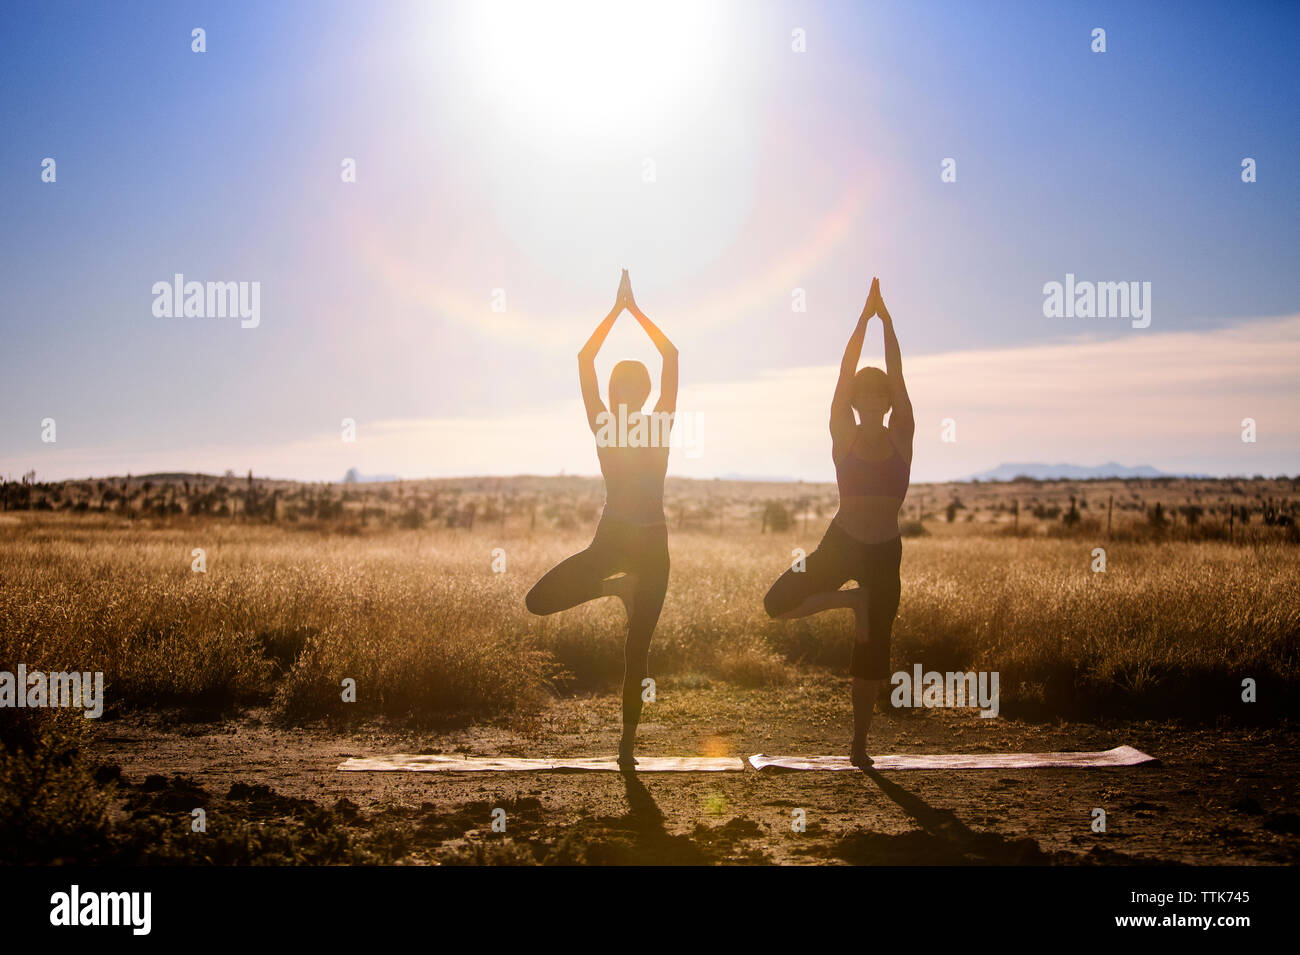 Women practicing yoga in tree pose on field Stock Photo